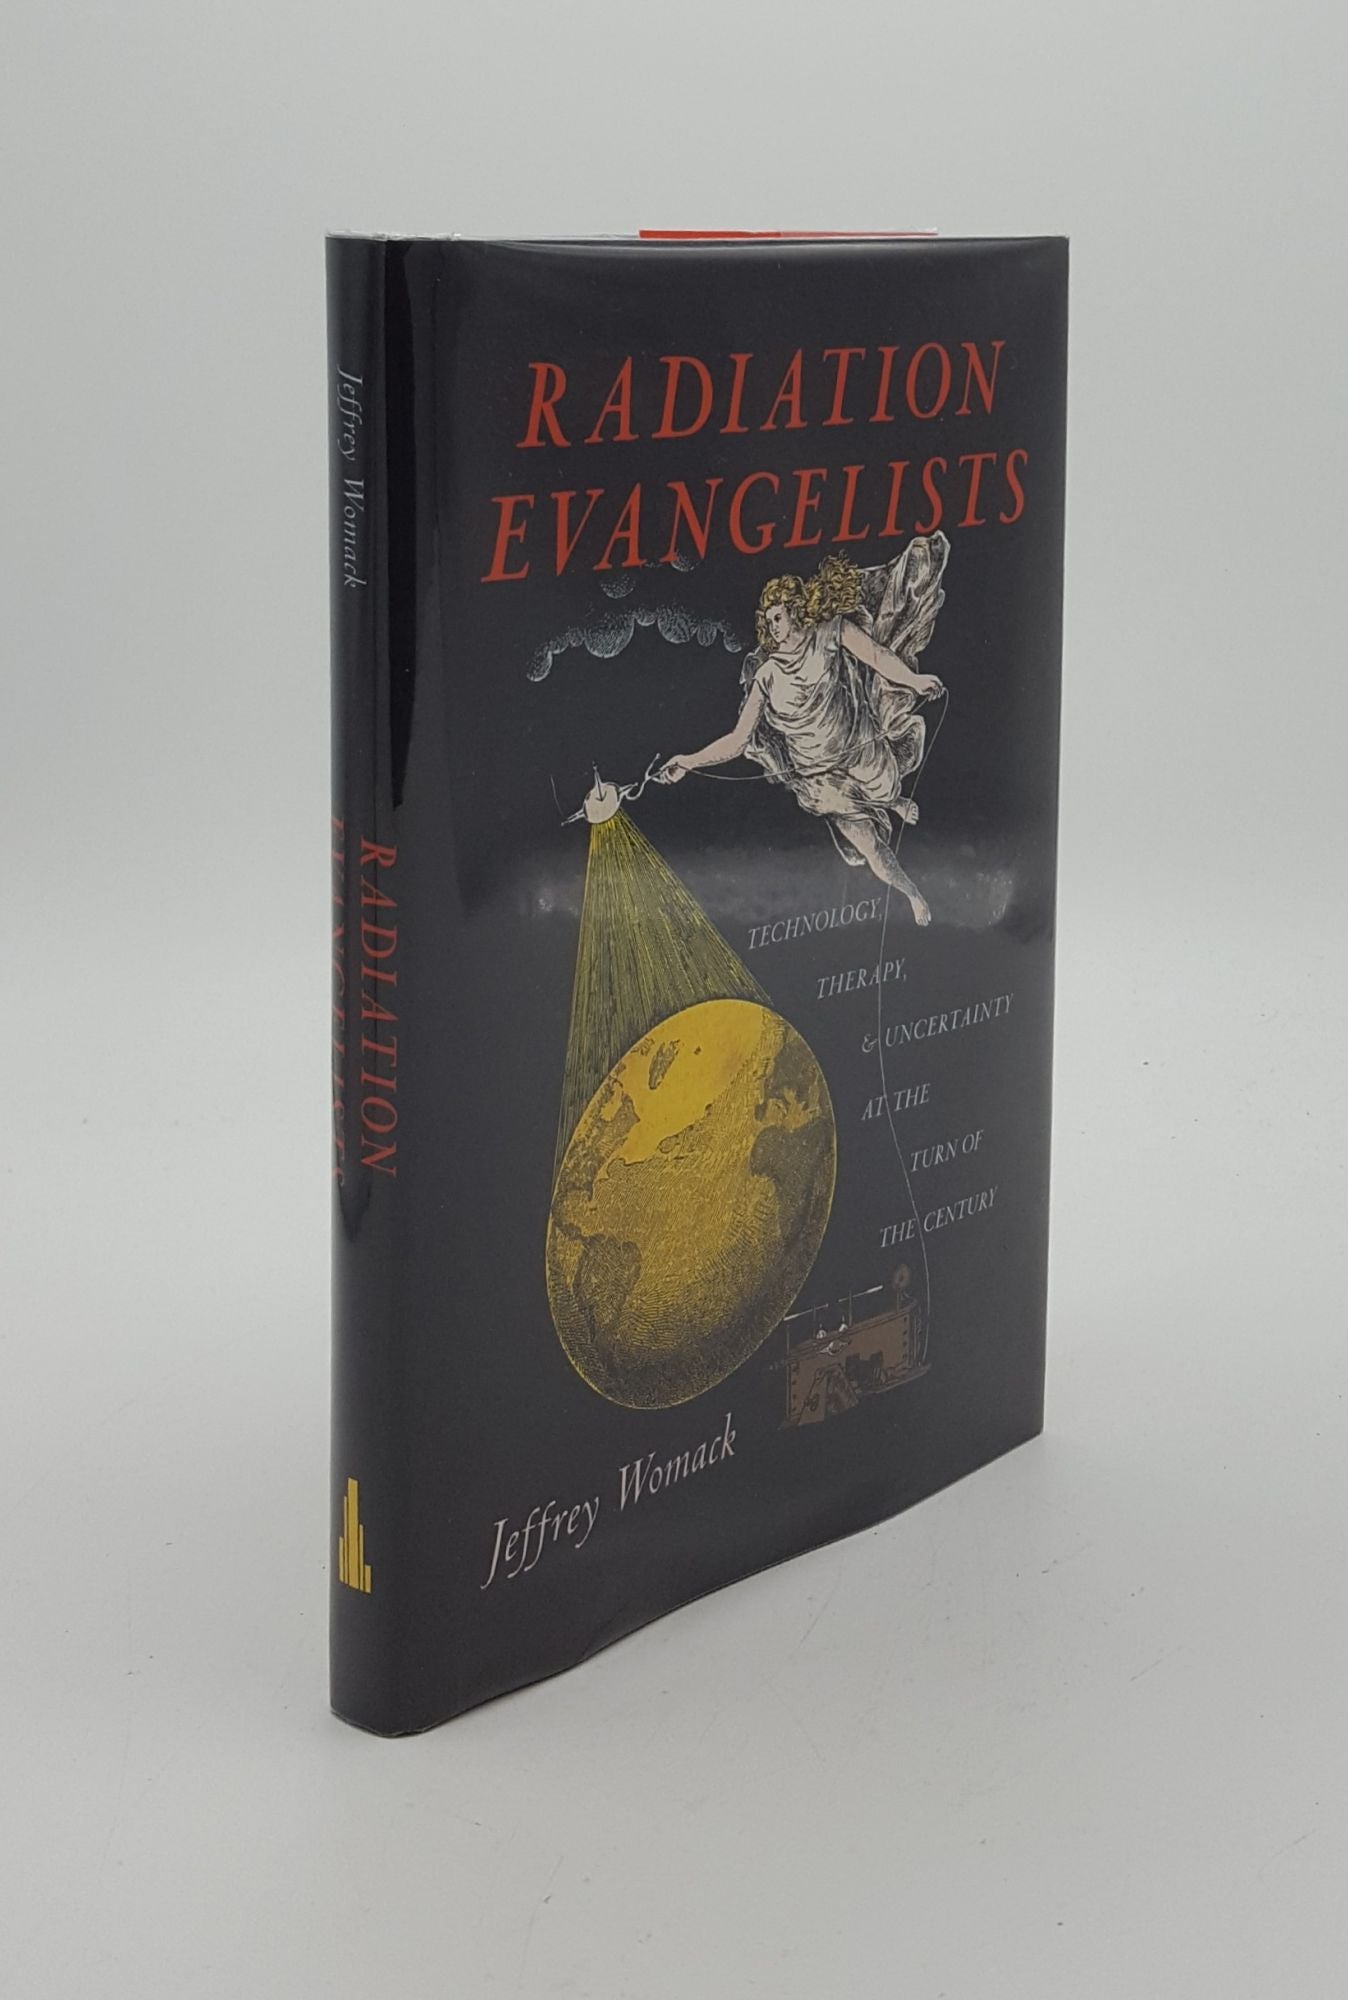 WOMACK Jeffrey - Radiation Evangelists Technology Therapy and Uncertainty at the Turn of the Century